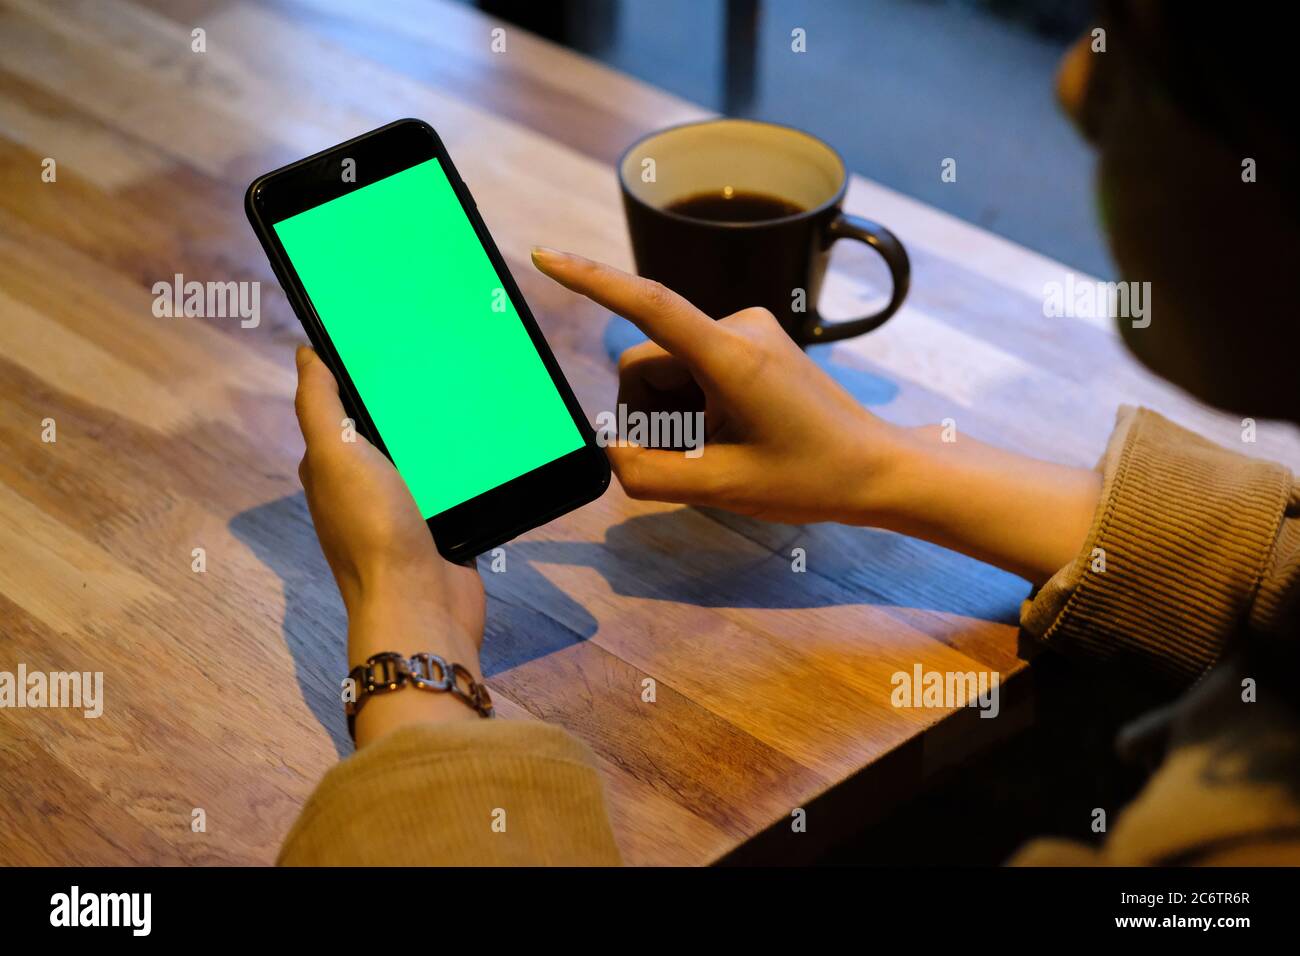 over shoulder one woman tapping green screen smartphone in cafe. A cup of coffee on wooden table. Blur background Stock Photo